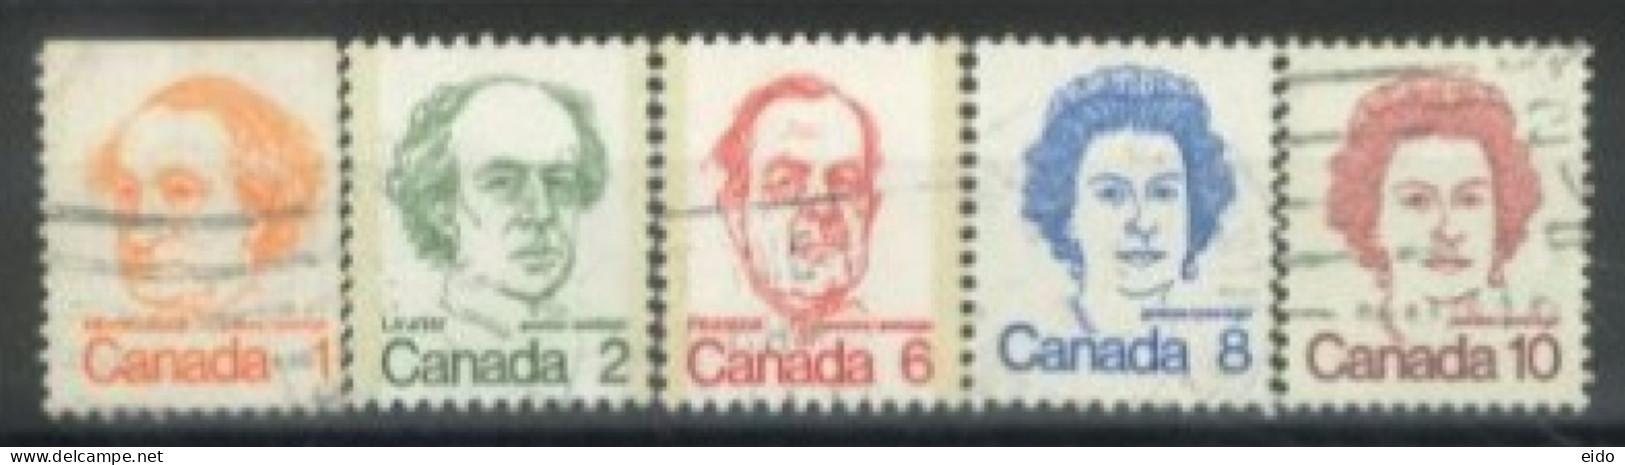 CANADA - 1972, CELEBRITIES STAMPS SET OF 5, USED. - Oblitérés